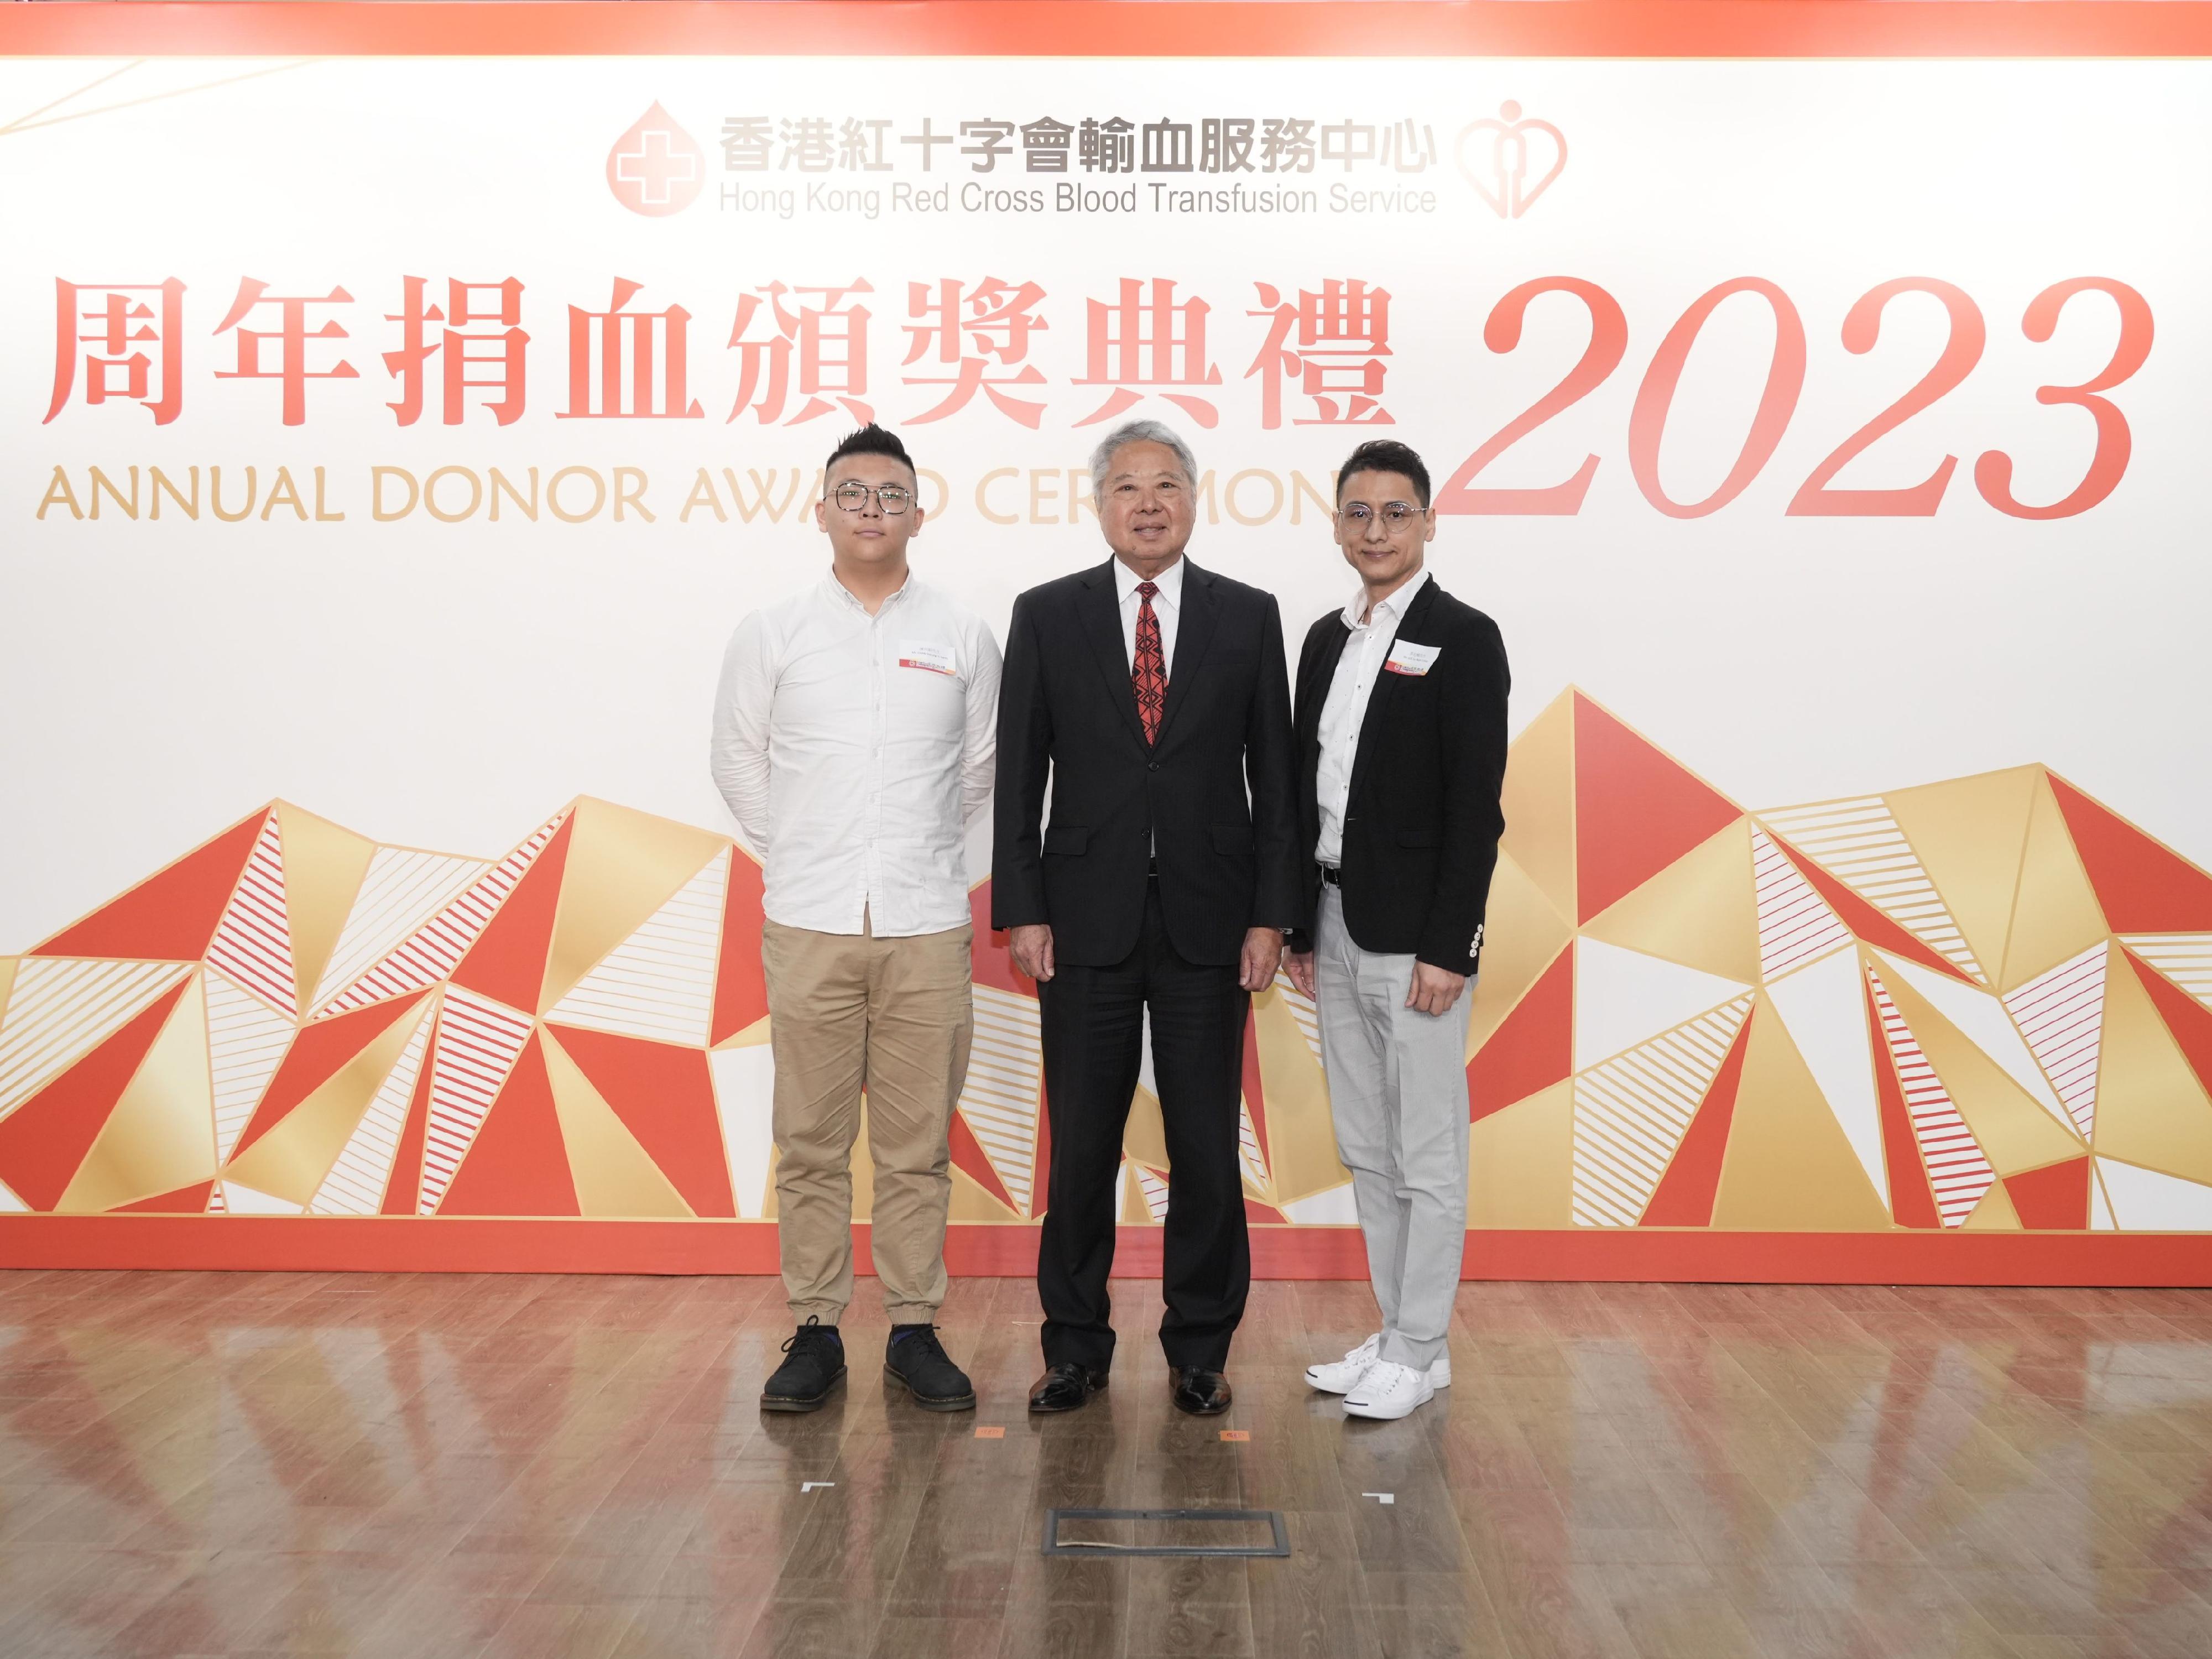 The Hong Kong Red Cross (HKRC) Blood Transfusion Service today (June 10) held its Annual Donor Award Ceremony to commend outstanding blood donors. Mr Erikku Lee (right), Hong Kong Record Keeper for Apheresis blood donation, accumulated 725 times donation in 2022/23. Mr Santo Chan (left), in his early twenties, has accumulated 50 times donation. Photo shows Mr Lee, Mr Chan and the President of the HKRC, Mr George Joseph Ho (centre). 